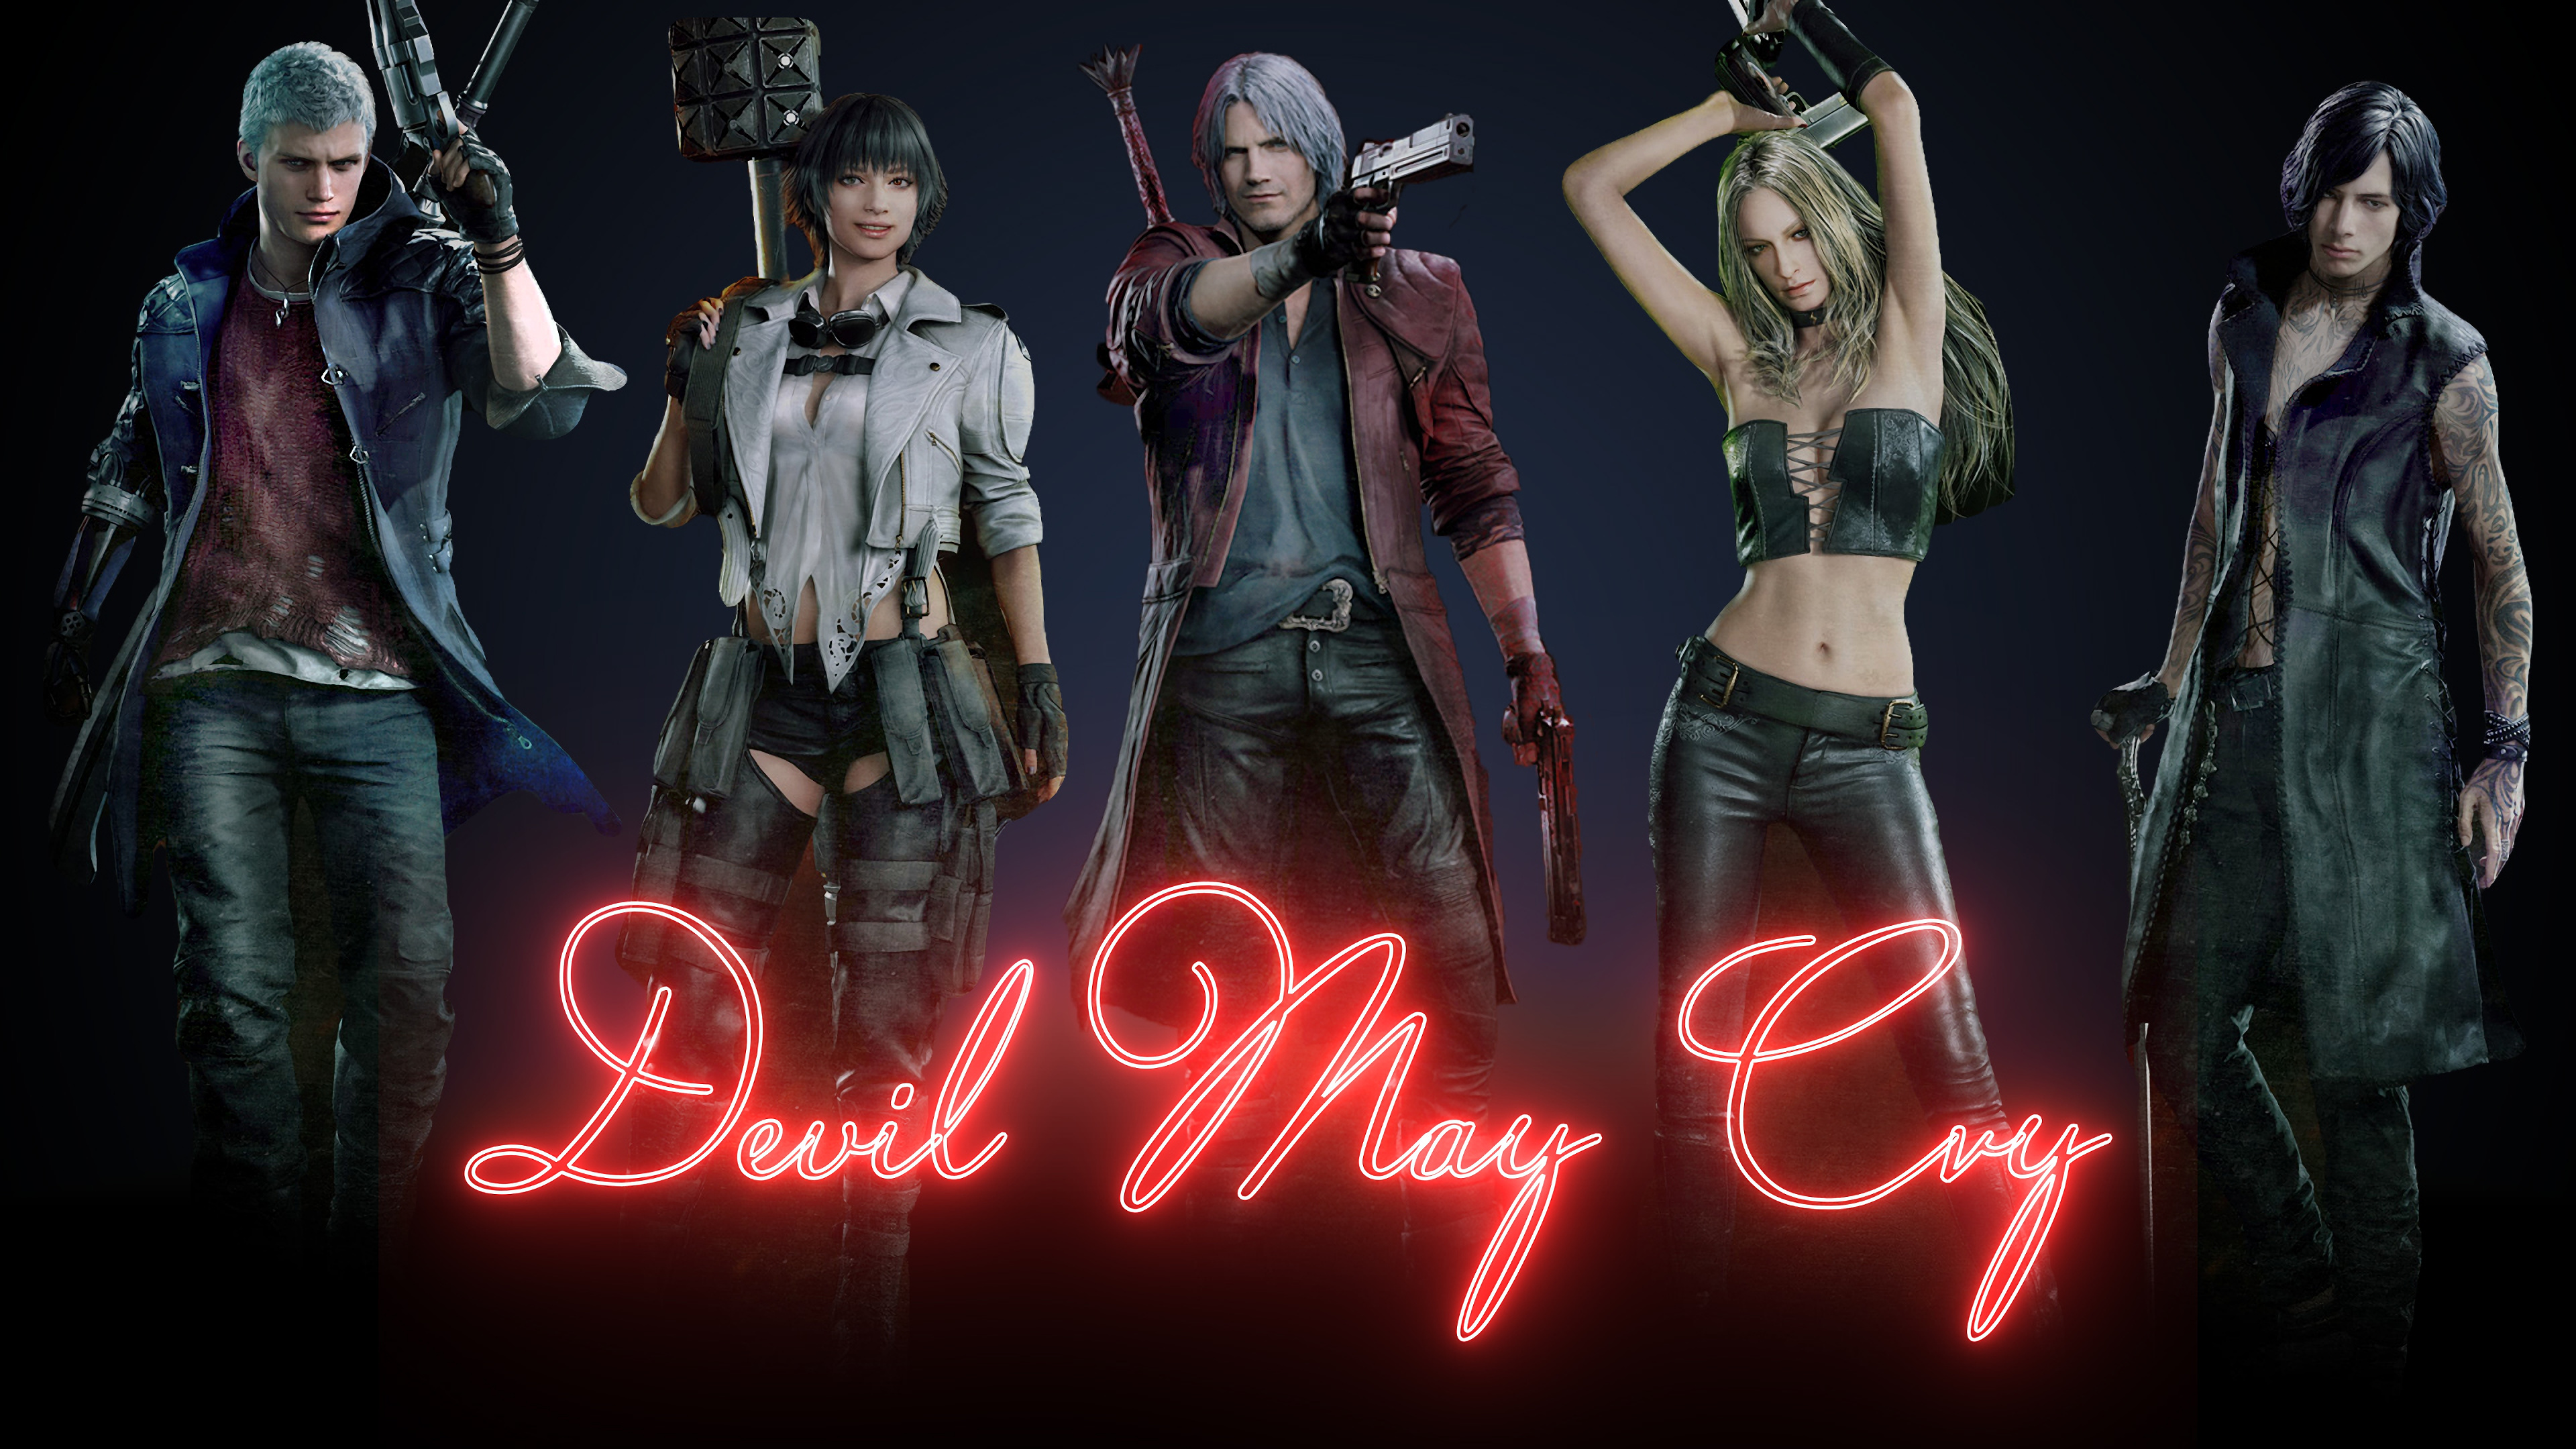 100+] Devil May Cry Characters Wallpapers